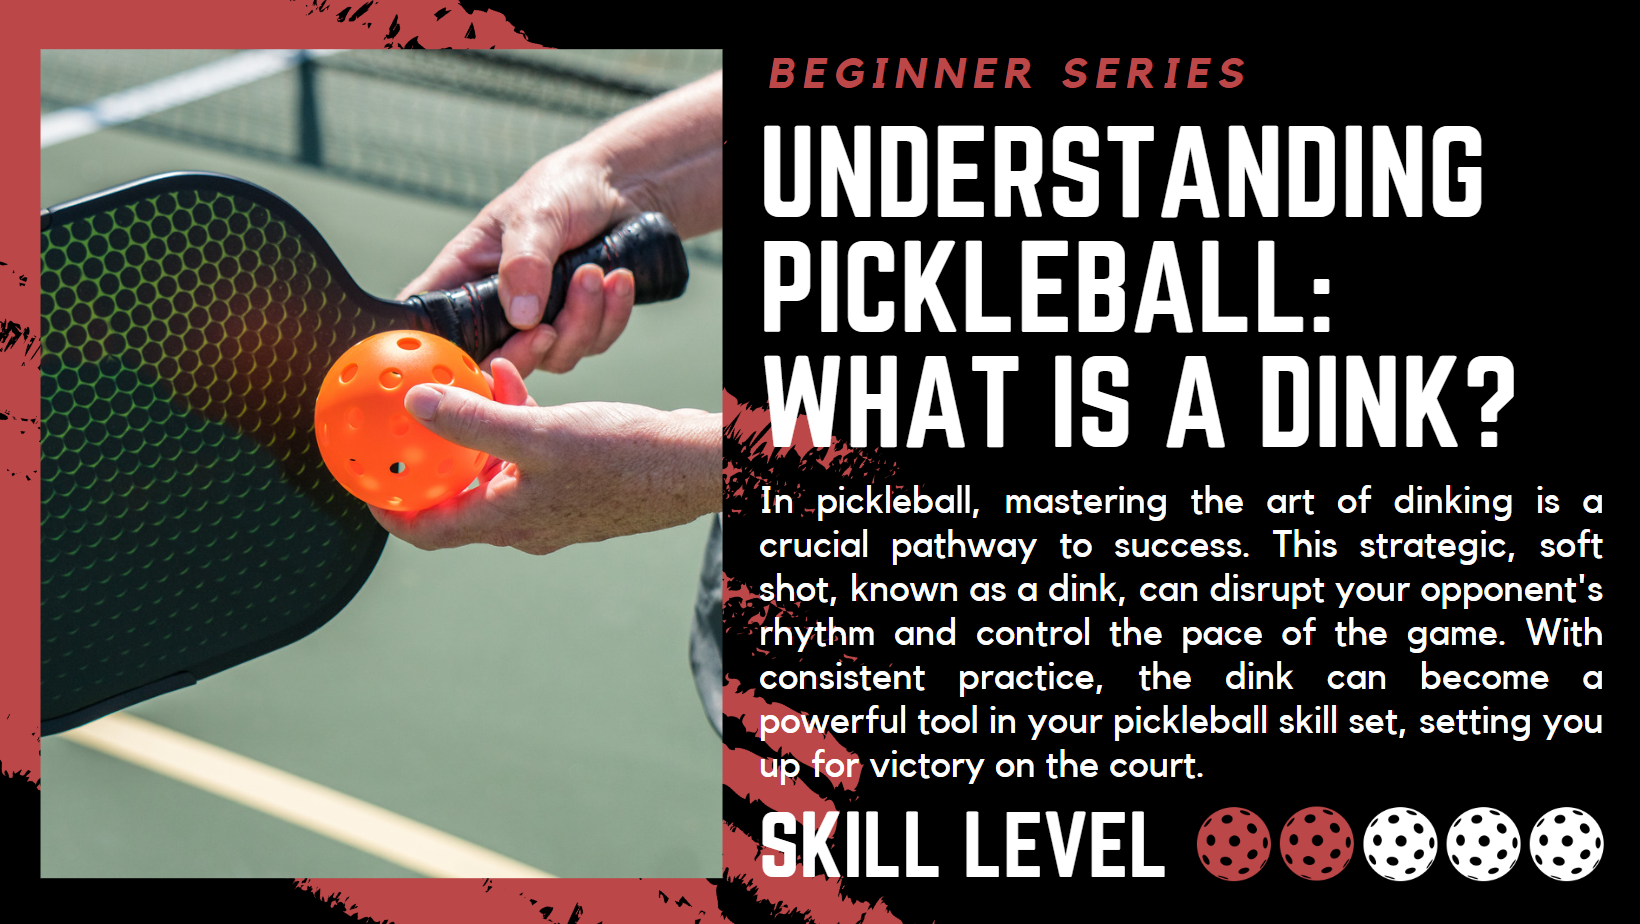 Understanding Pickleball: What is a Dink? In pickleball, mastering the art of dinking is a crucial pathway to success. This strategic, soft shot, known as a dink, can disrupt your opponent's rhythm and control the pace of the game. With consistent practice, the dink can become a powerful tool in your pickleball skill set, setting you up for victory on the court. Skill Level 2 of 5